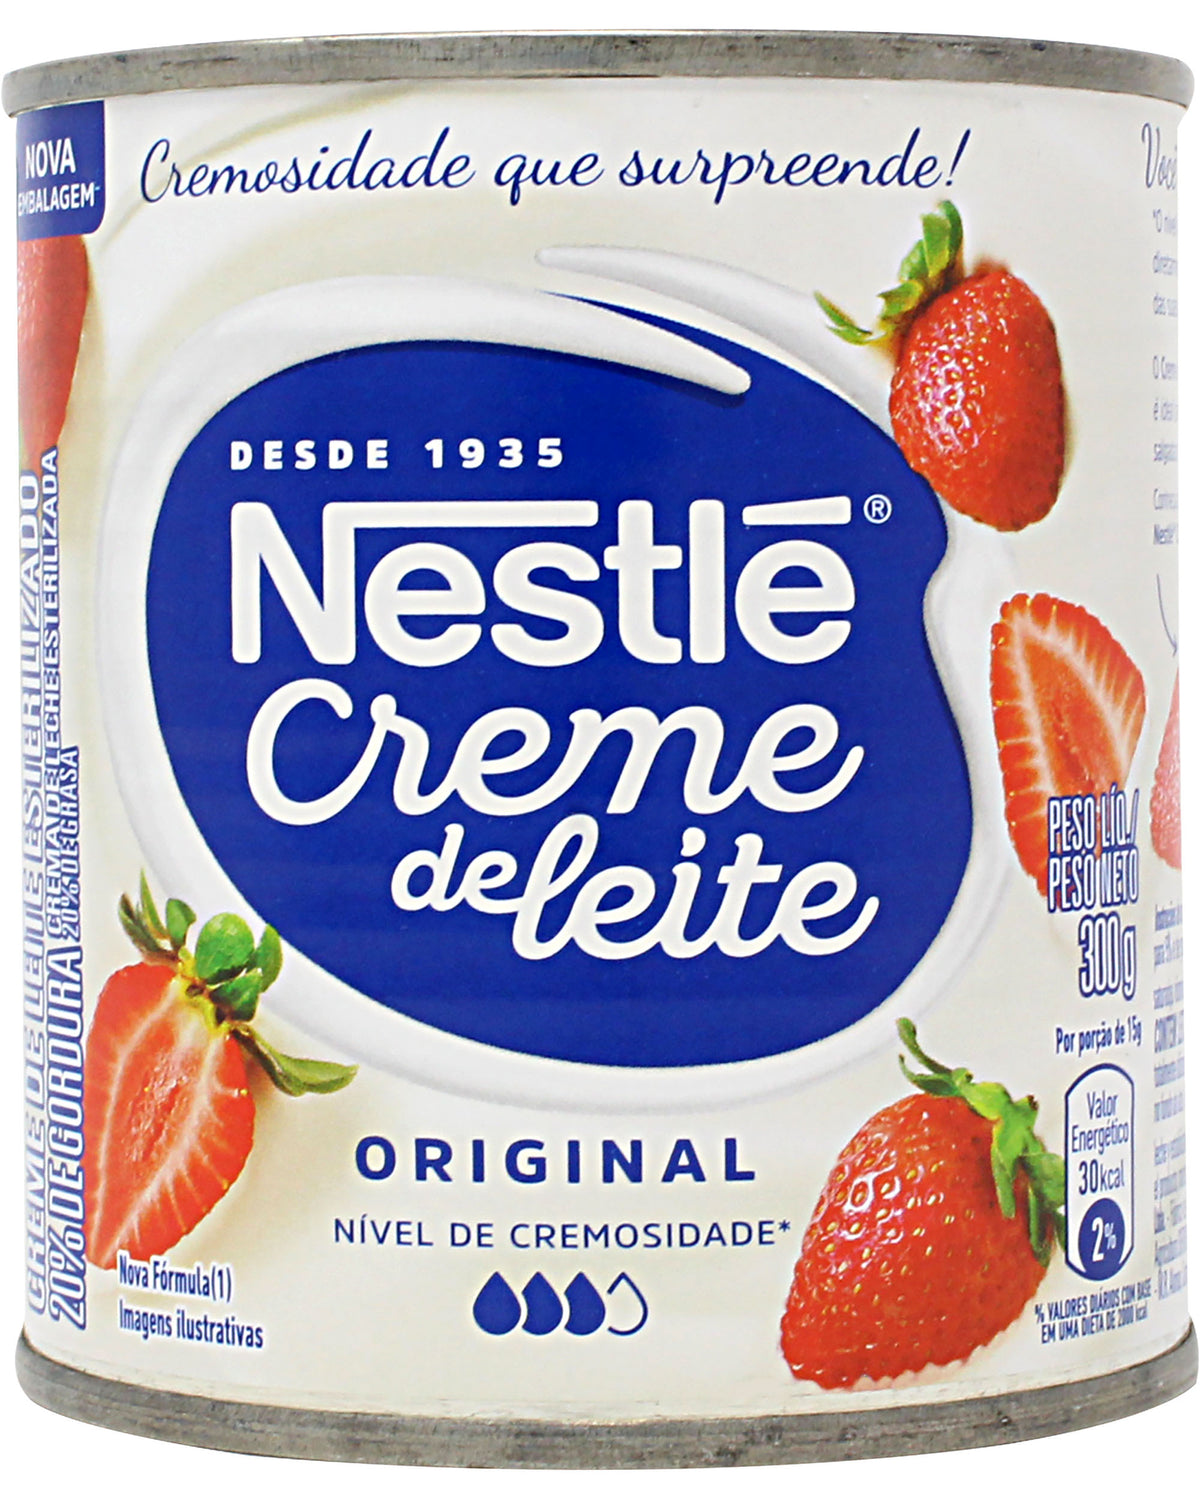 https://www.shopalittletaste.shop/wp-content/uploads/1689/27/every-customer-is-treated-as-if-they-were-family-we-help-people-locate-the-nestle-creme-de-leite-table-cream-10-5-oz-300-g-nestle-brazil_0.jpg